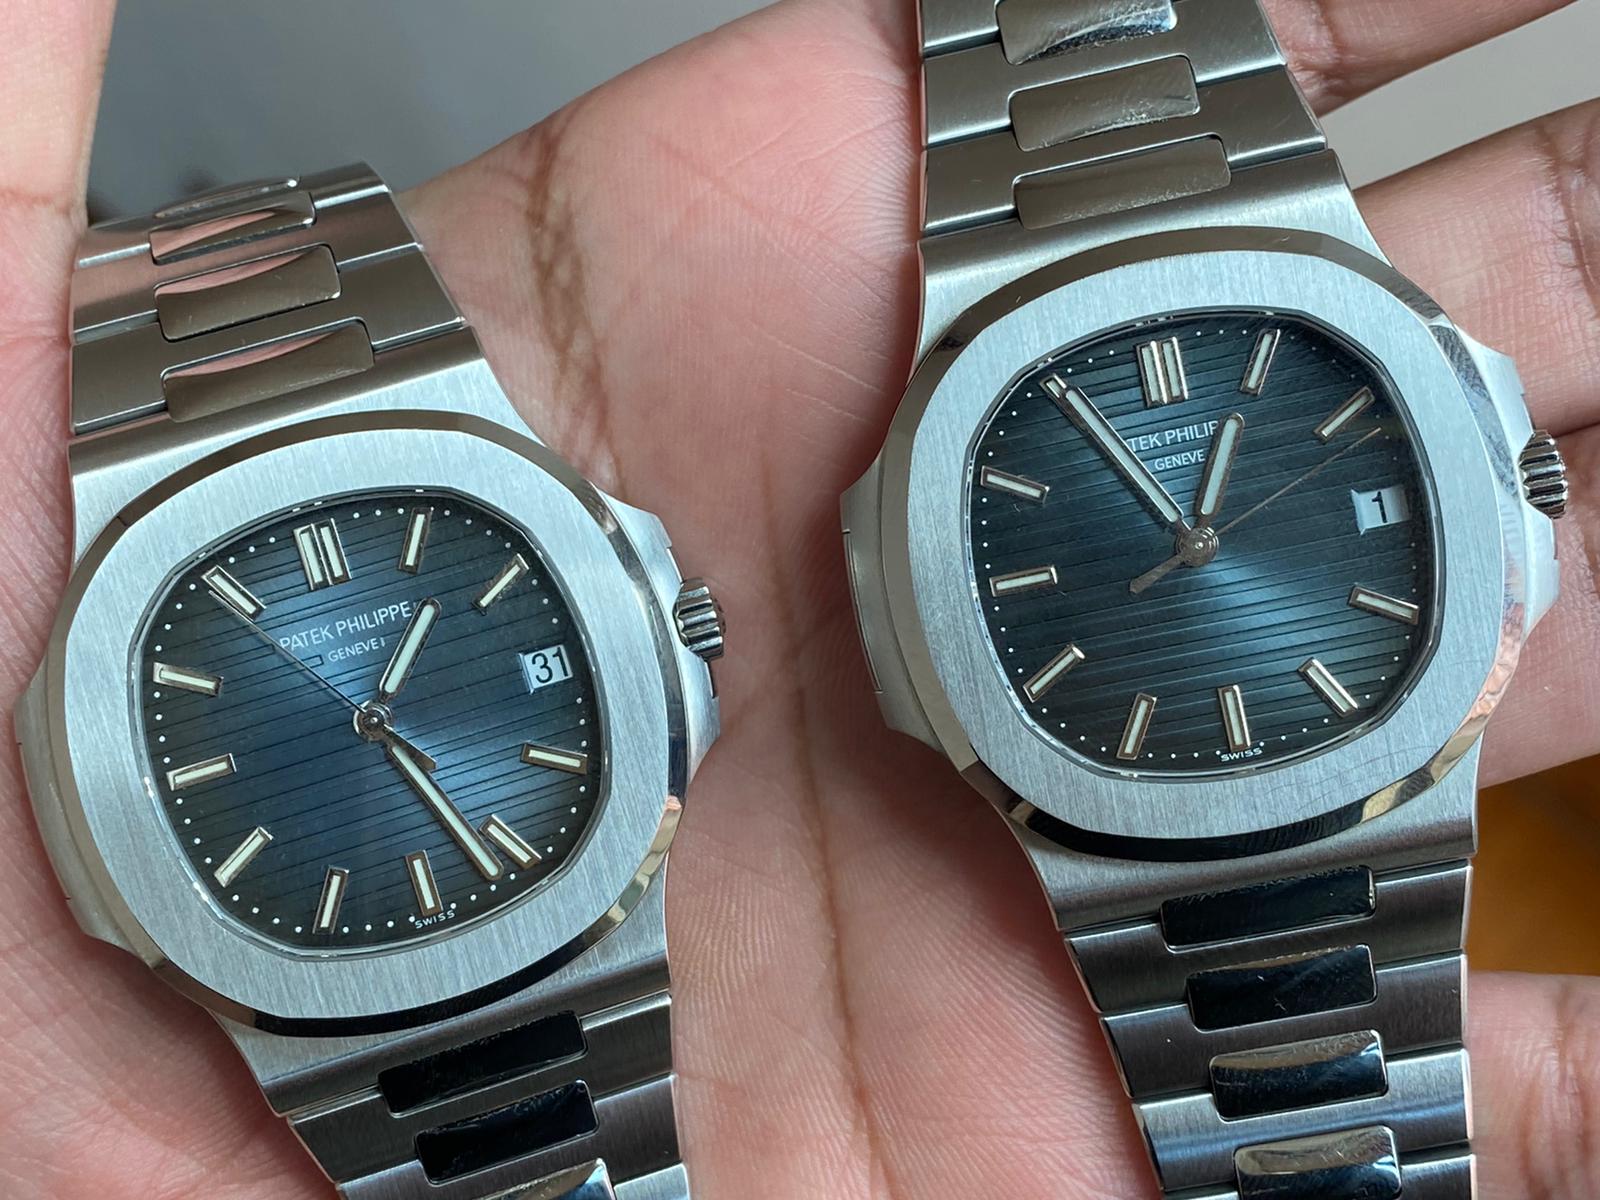 A gripping story about a Patek Philippe 5711 and a teenage conman